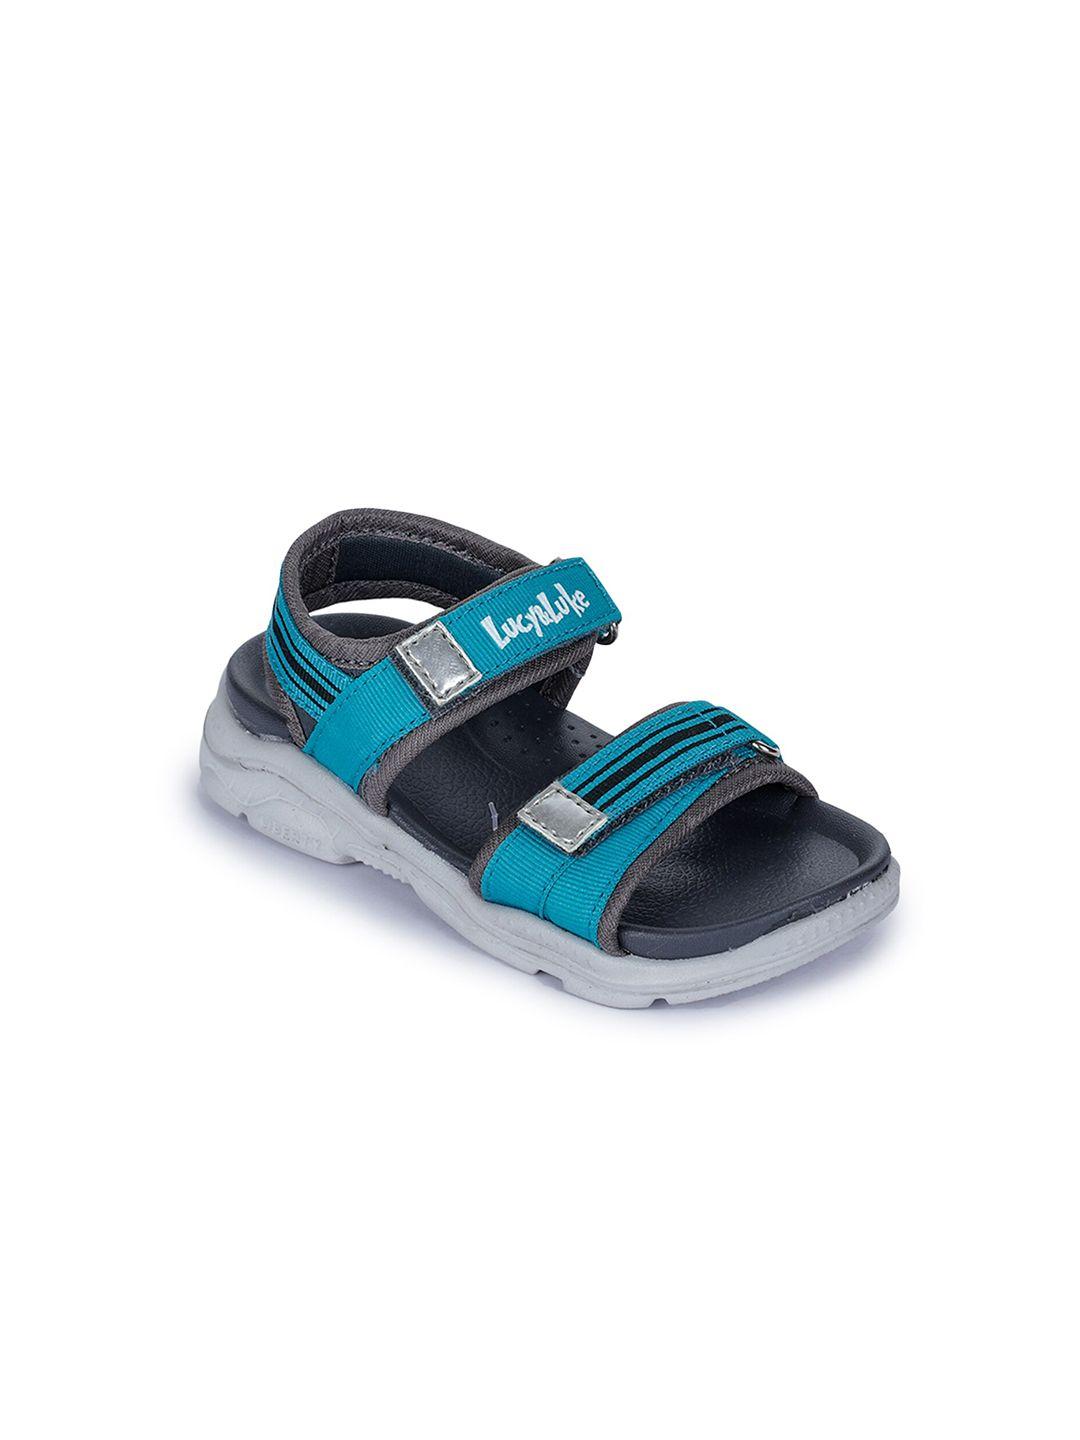 liberty kids turquoise blue & grey sports sandals